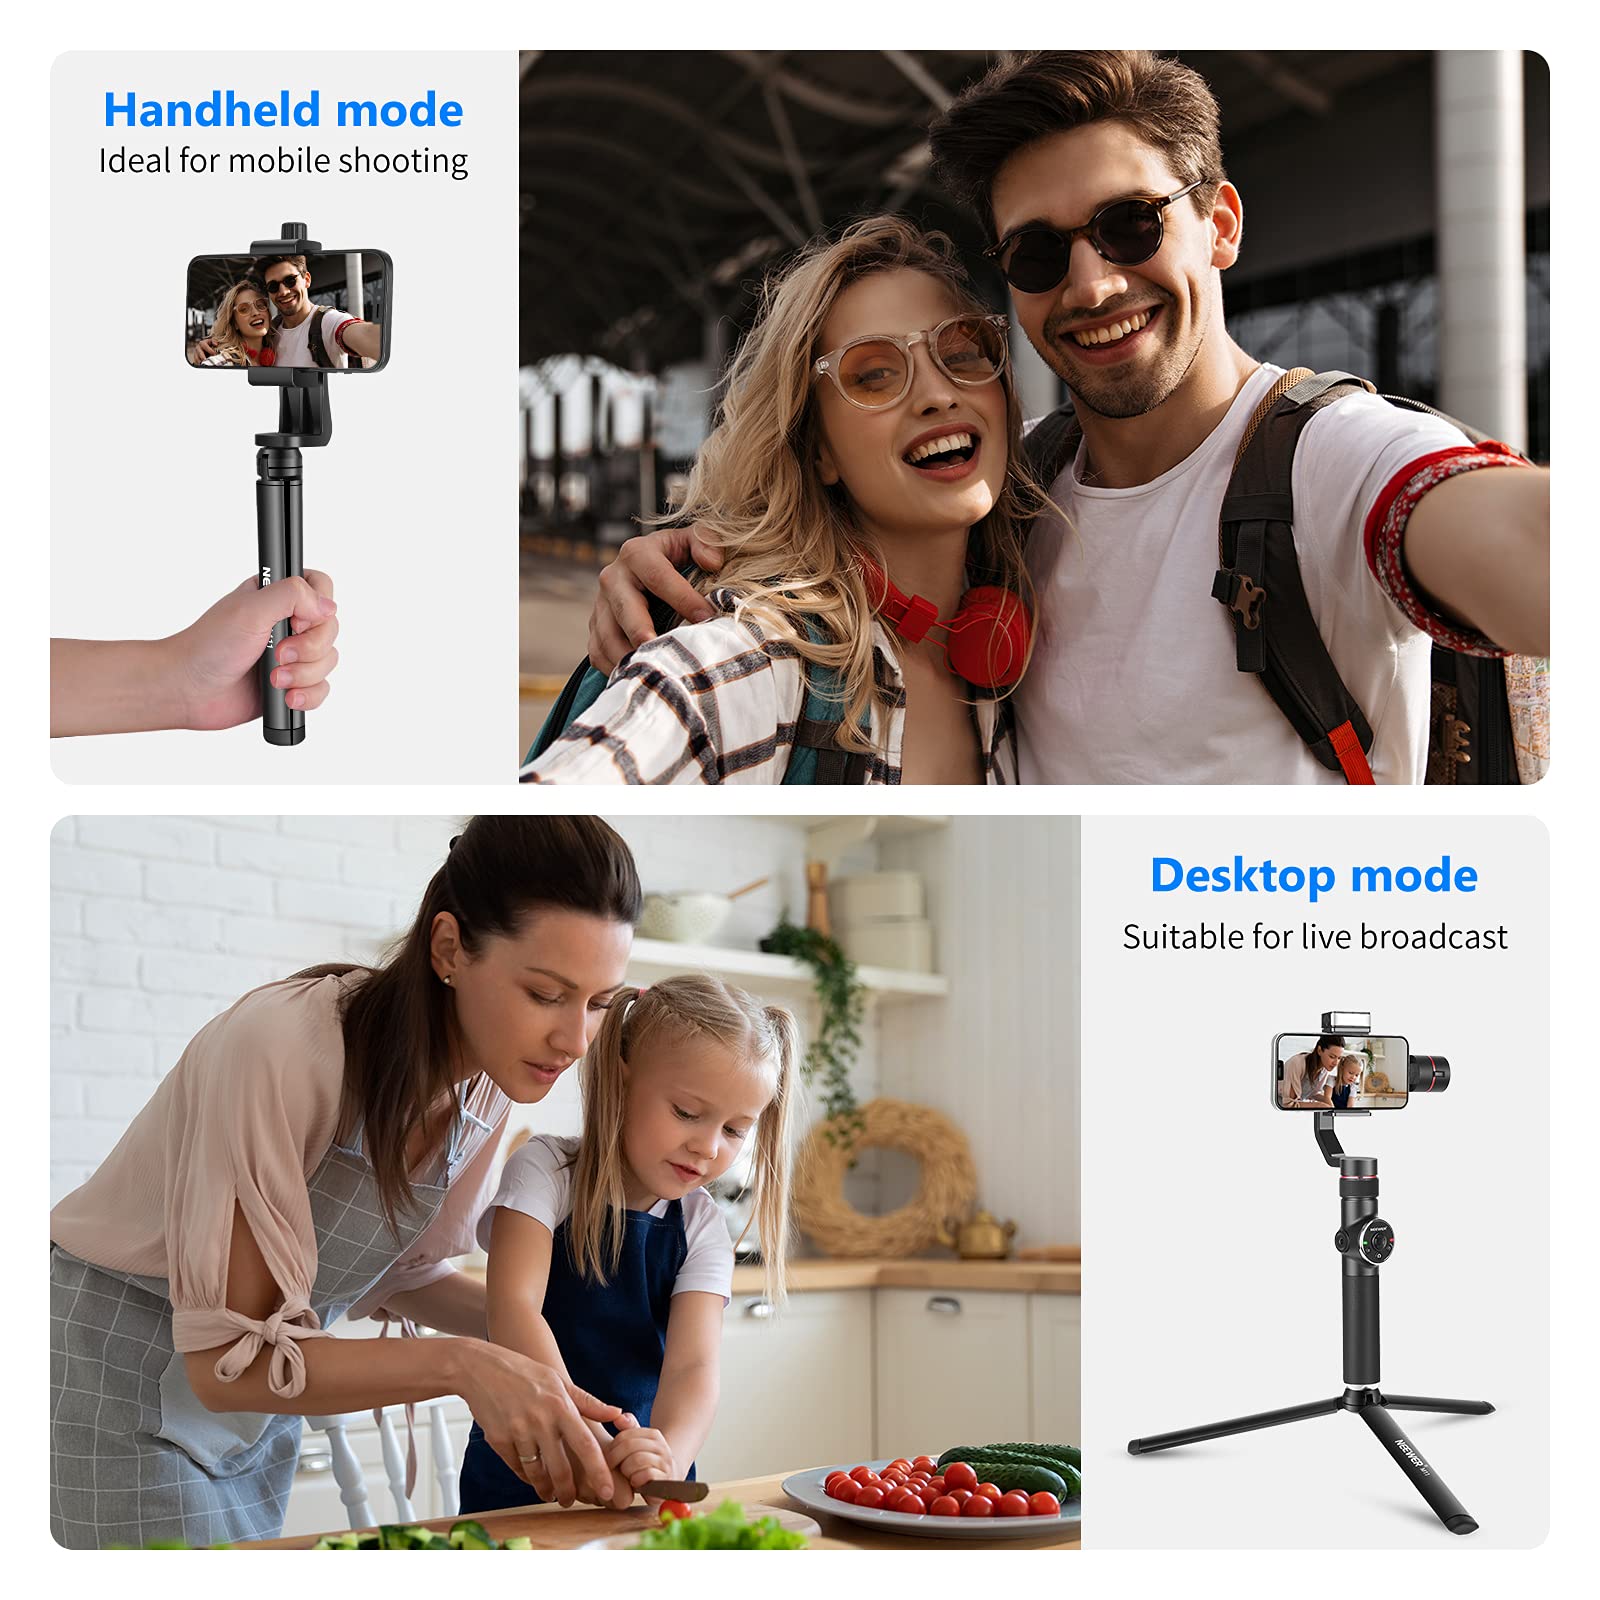 NEEWER Mini Metal Tripod, Table Stand, Desktop Compact Tripod Compatible with Crane M2, Smooth Q2, Gimbal Grip Stabilizer and All Cameras